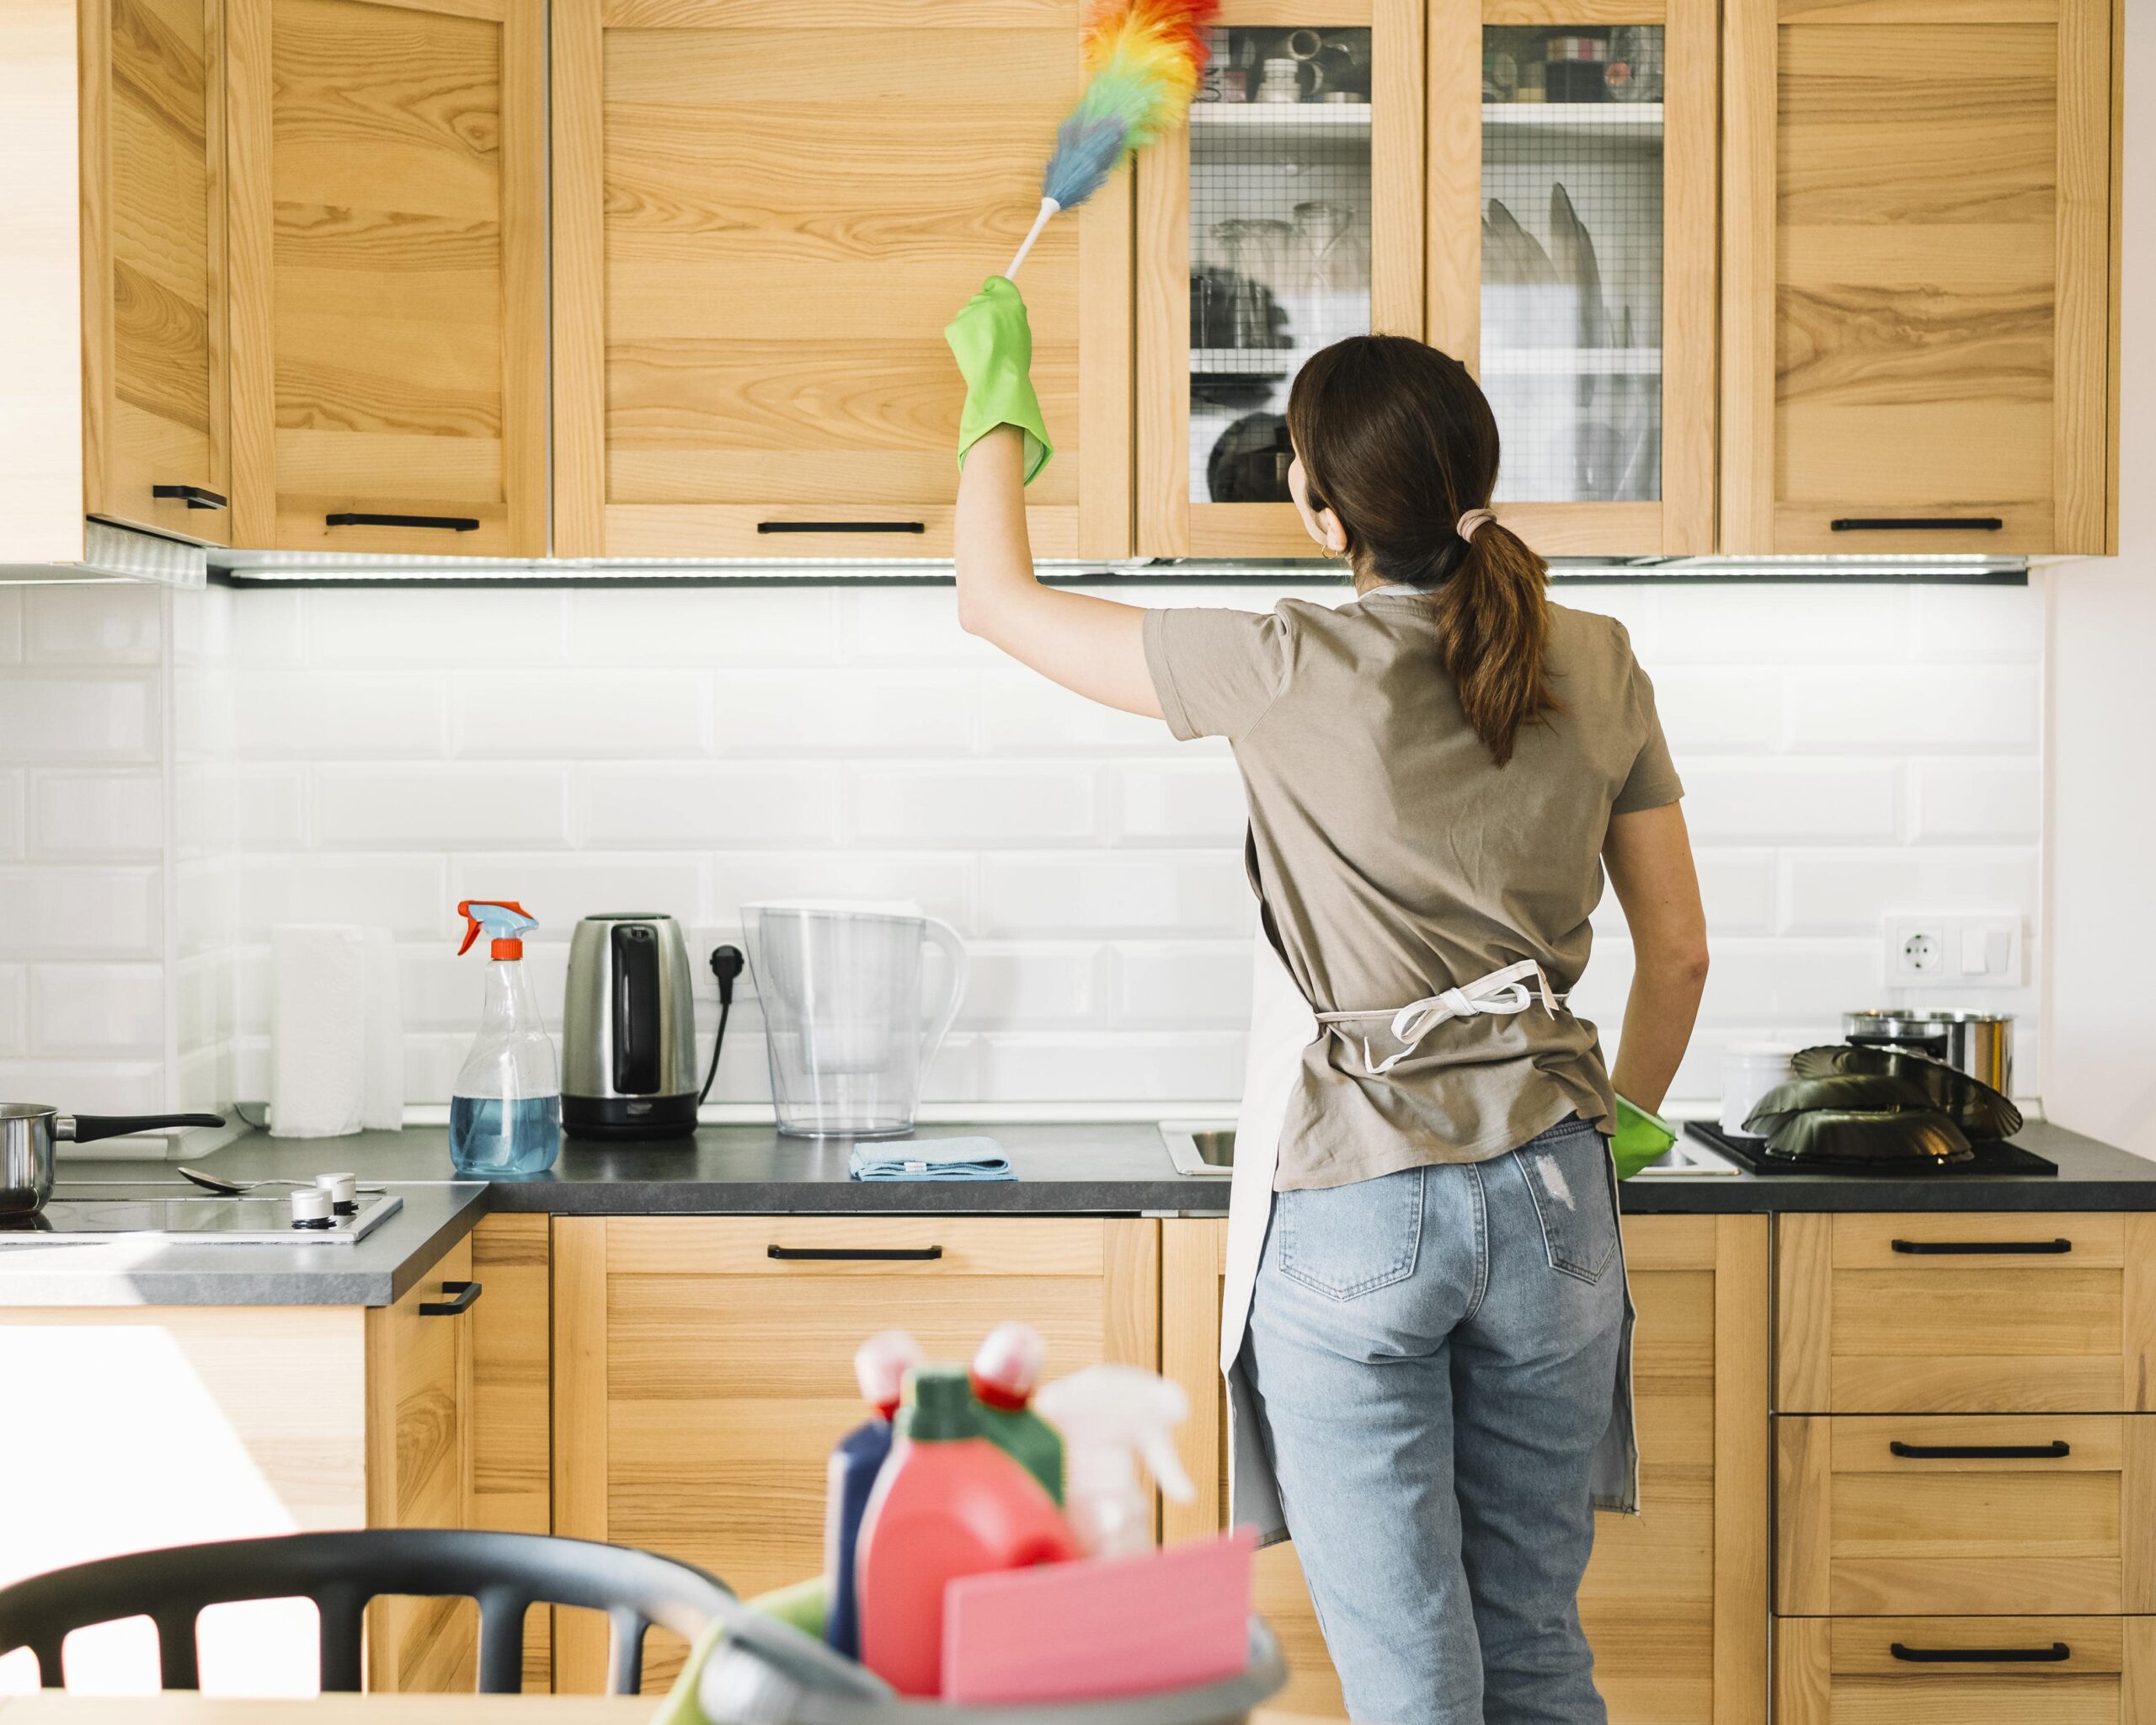 How to clean kitchen cabinets before painting